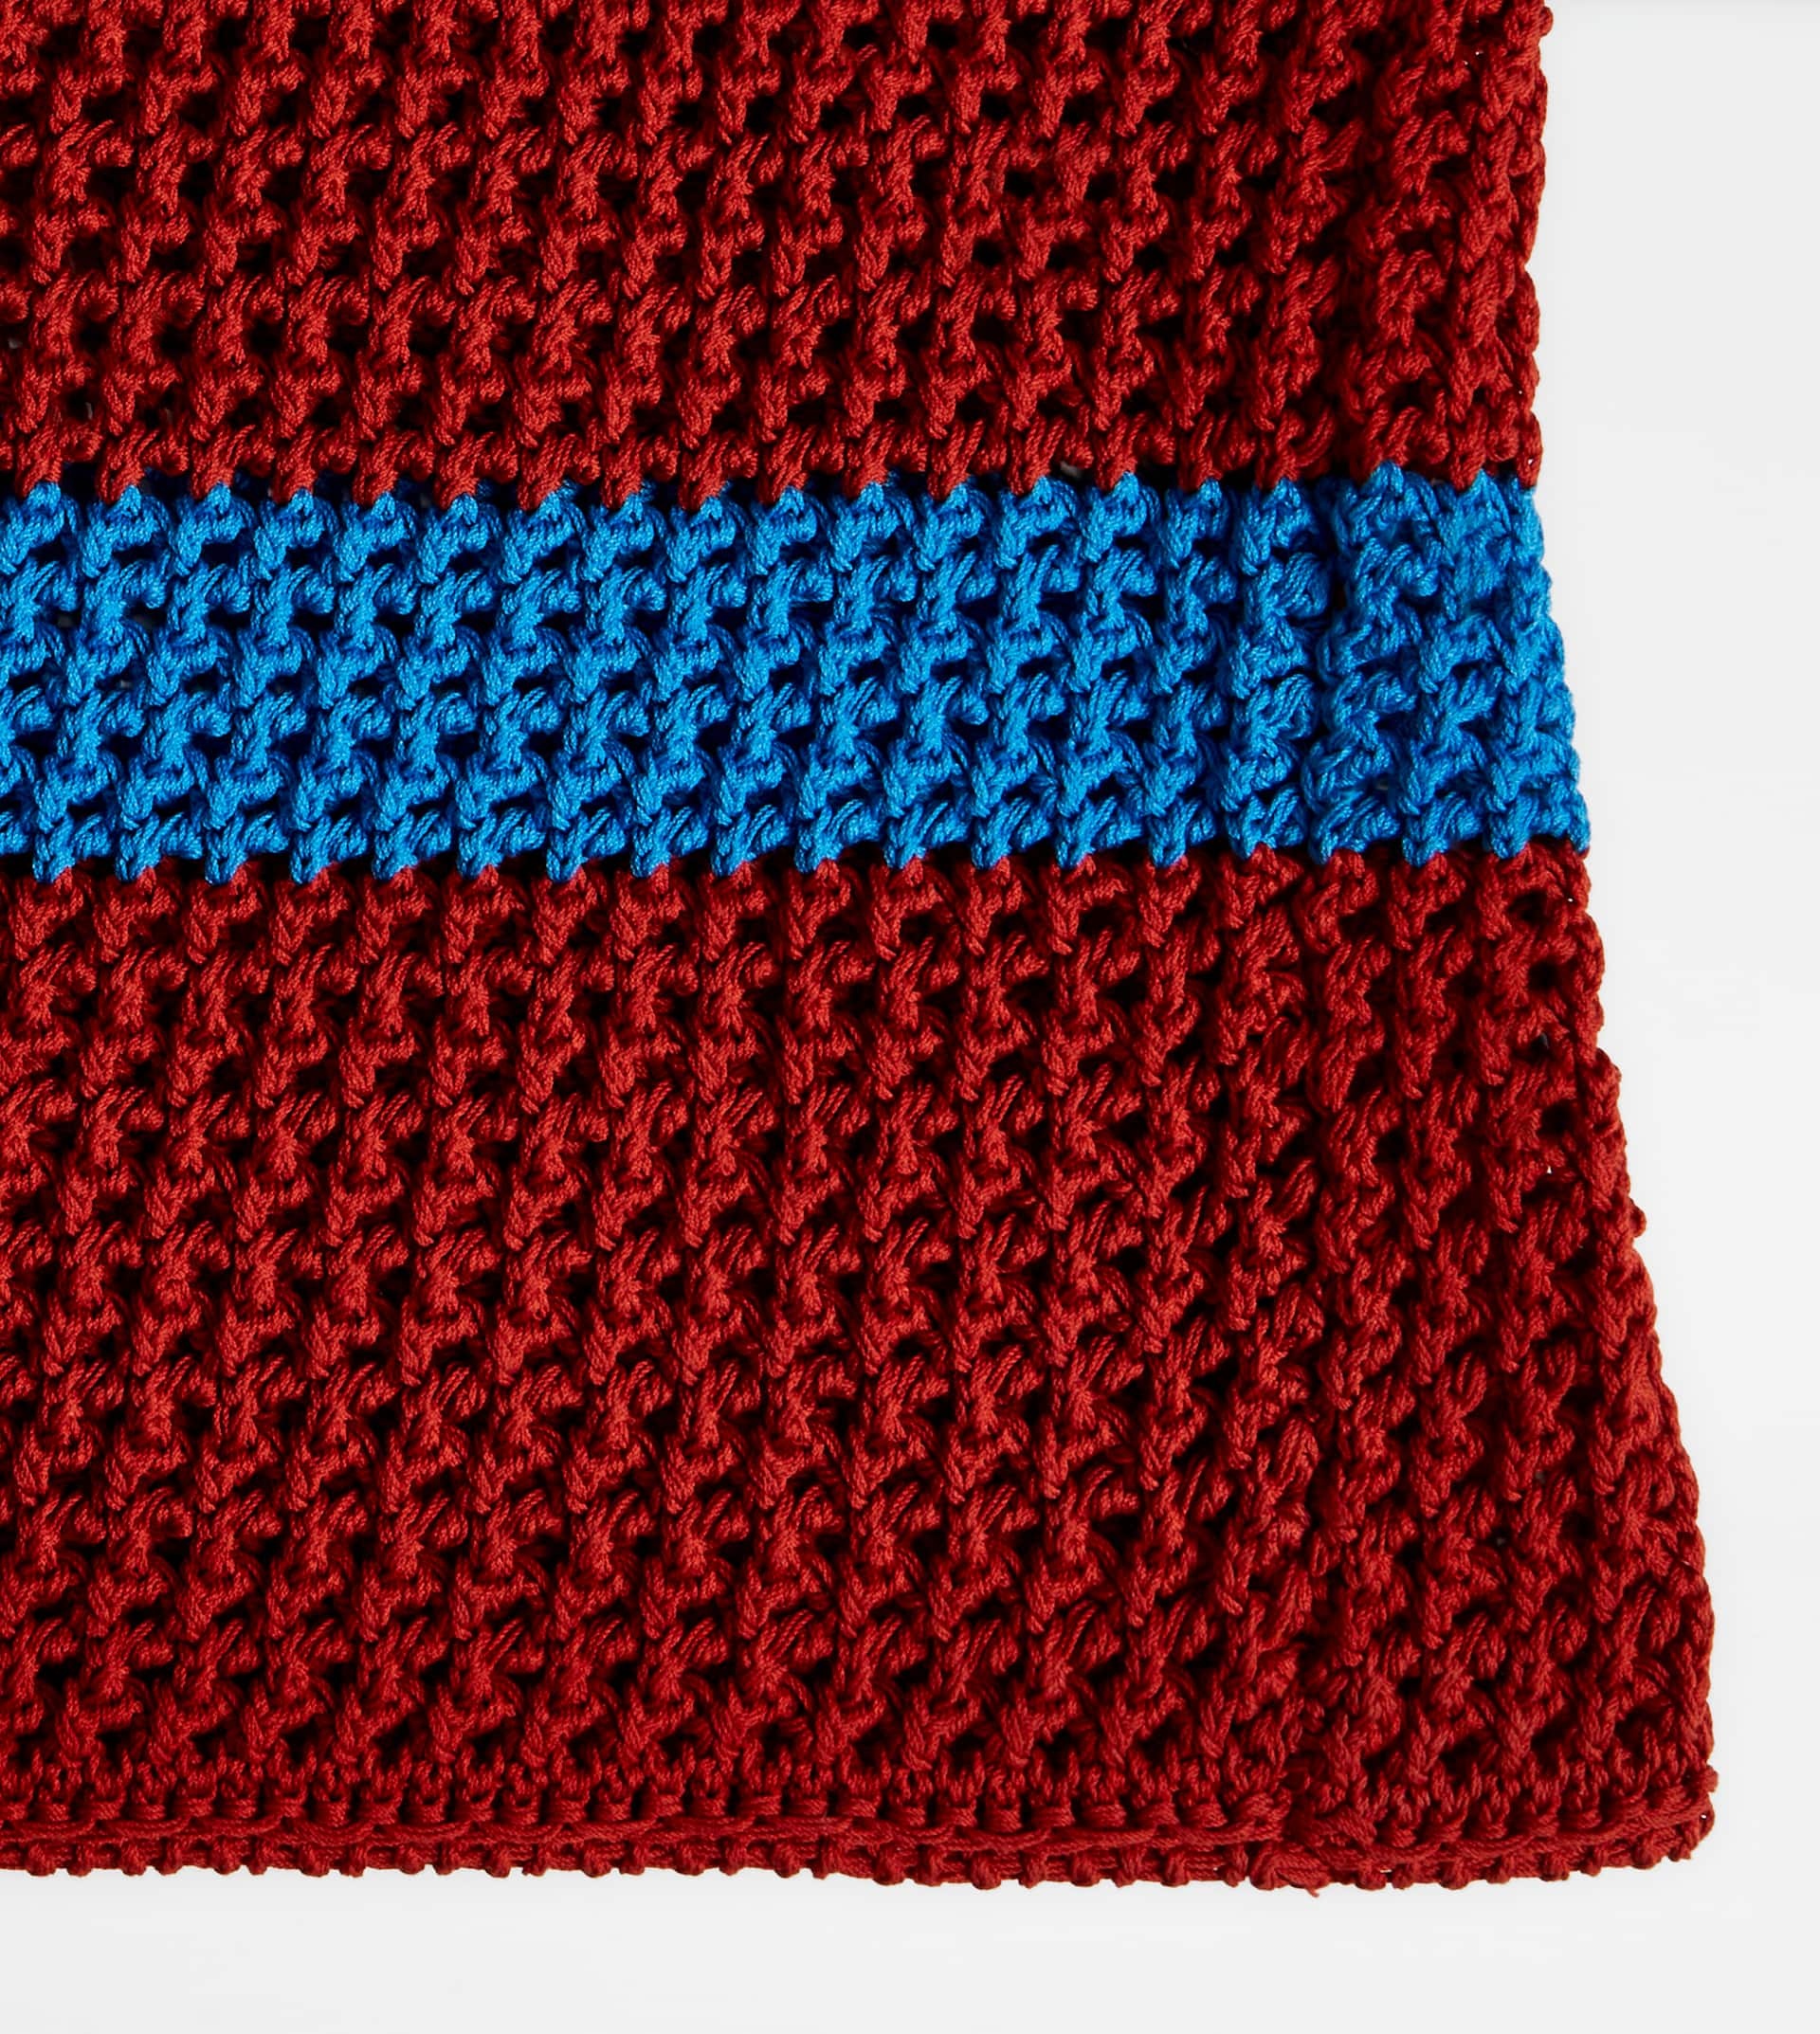 TOP IN COTTON KNIT - RED, LIGHT BLUE, YELLOW - 10